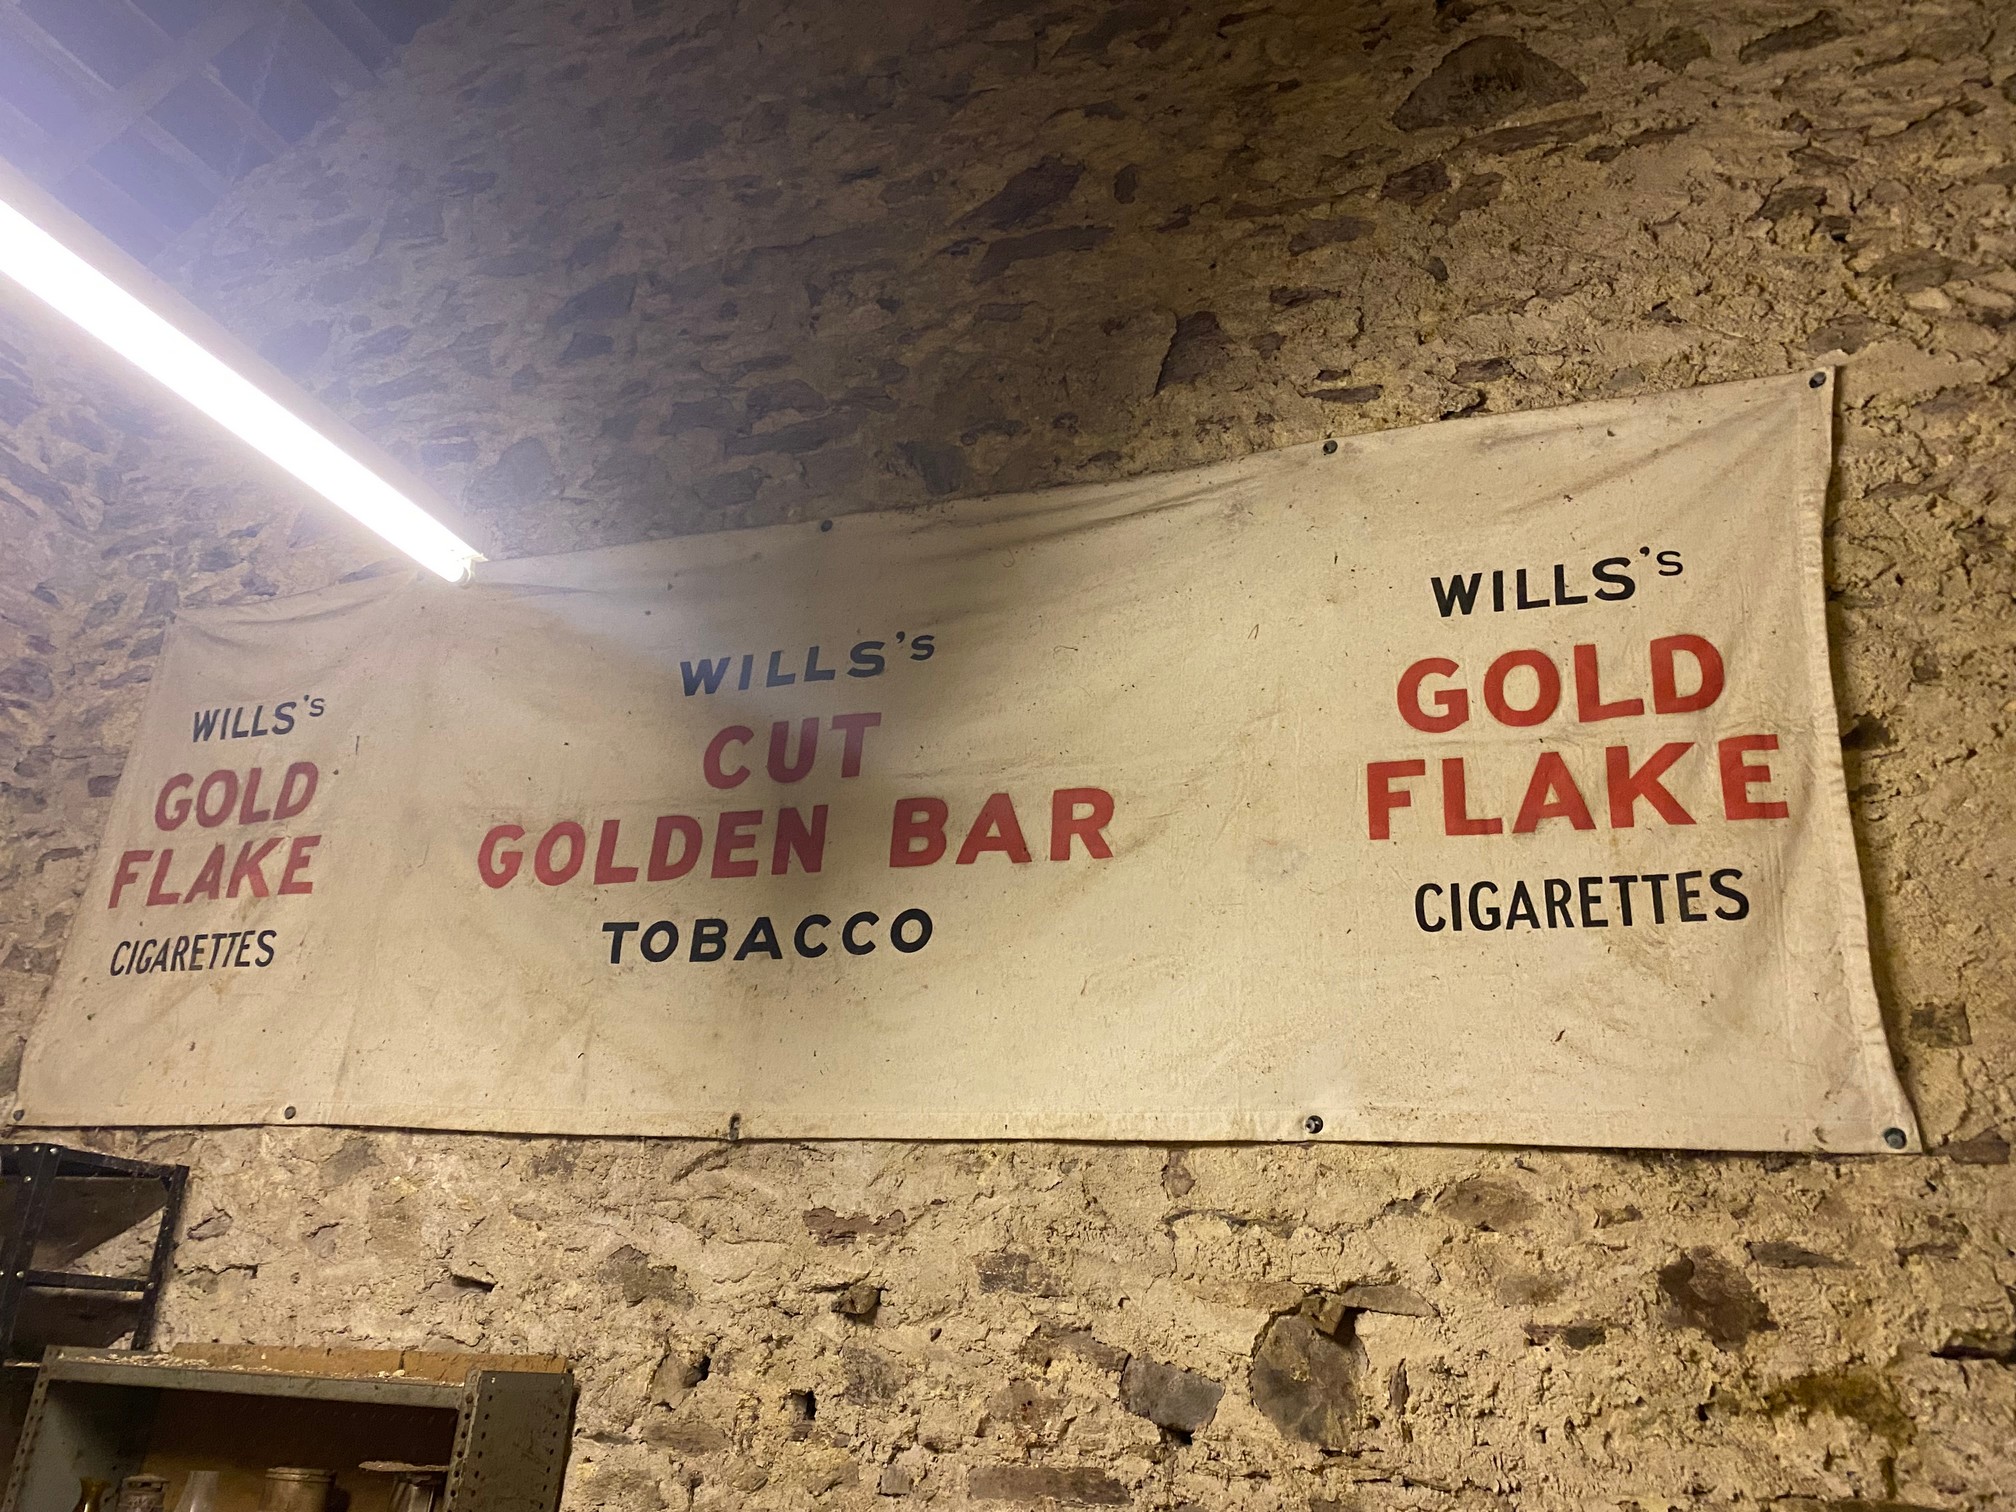 A large advertising banner for Wills's Cigarettes and Tobacco.